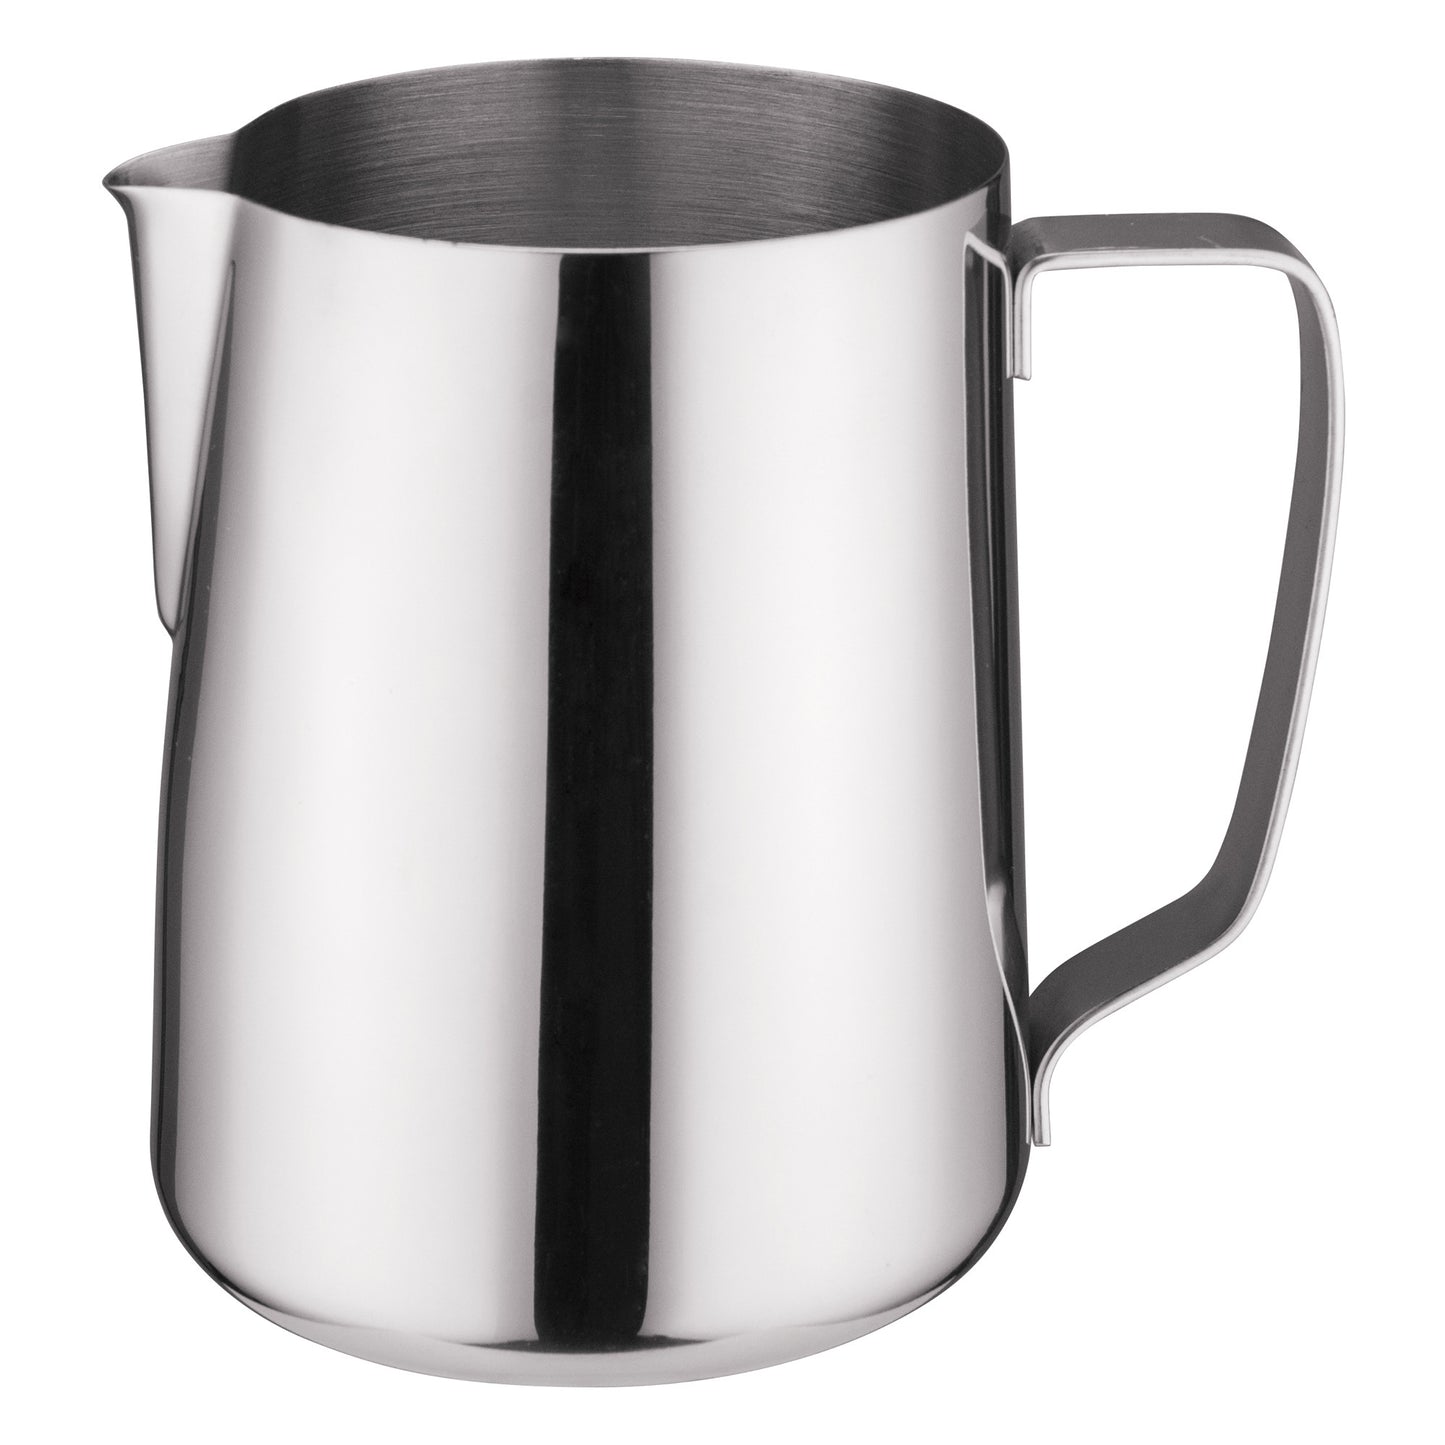 WP-66 - Frothing Pitcher, Stainless Steel - 66 oz